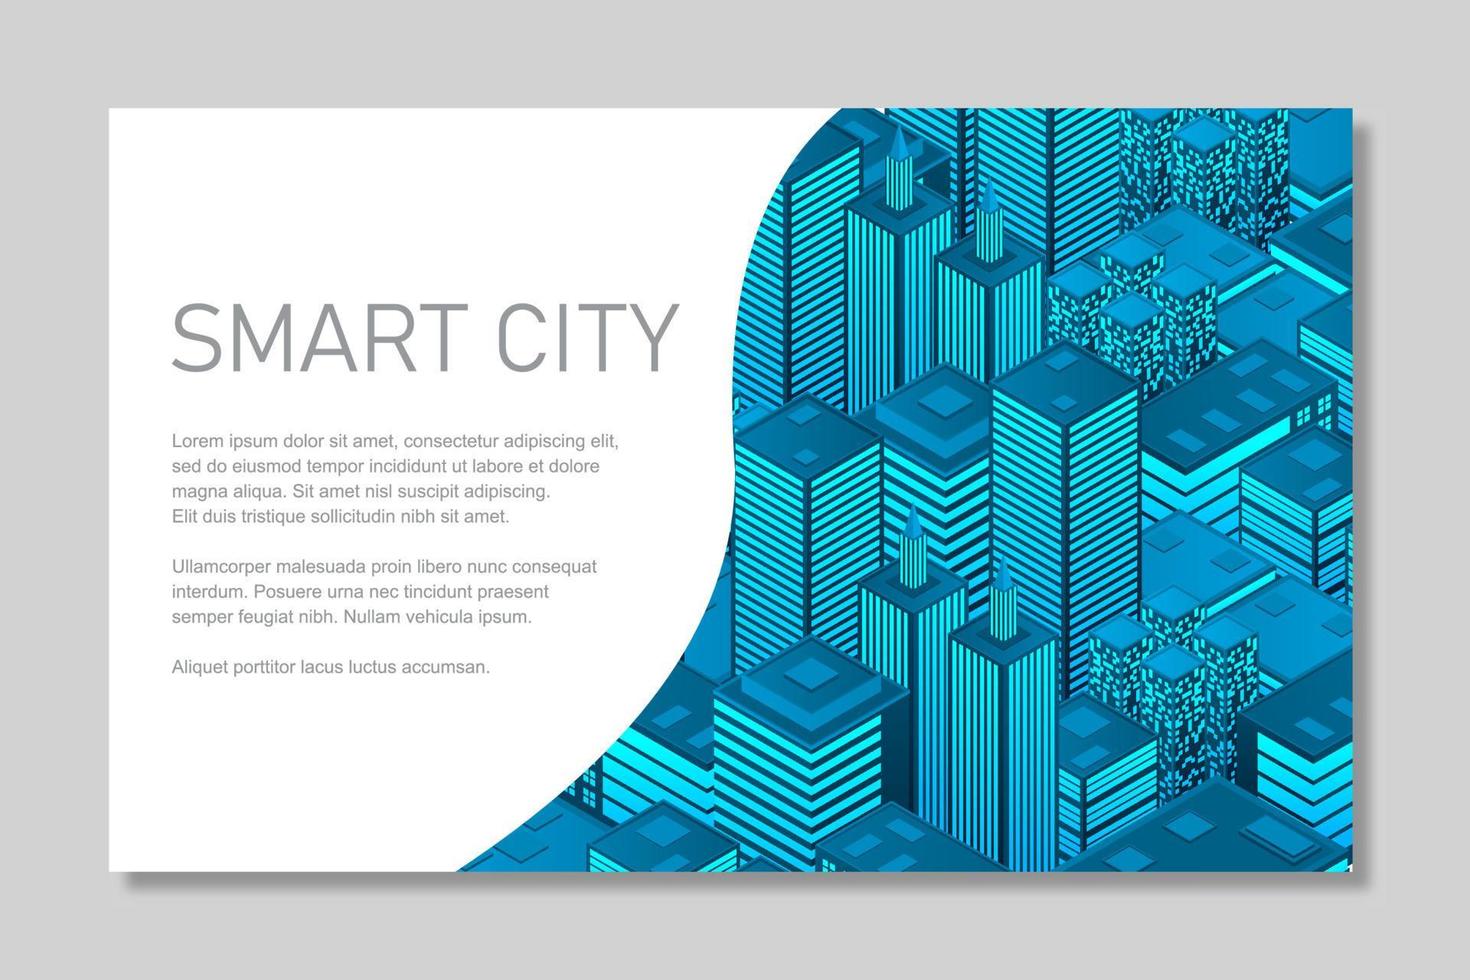 Smart city in a futuristic style. Isometric smart city illustration. Intelligent buildings. Business center with skyscrapers and intelligent buildings vector